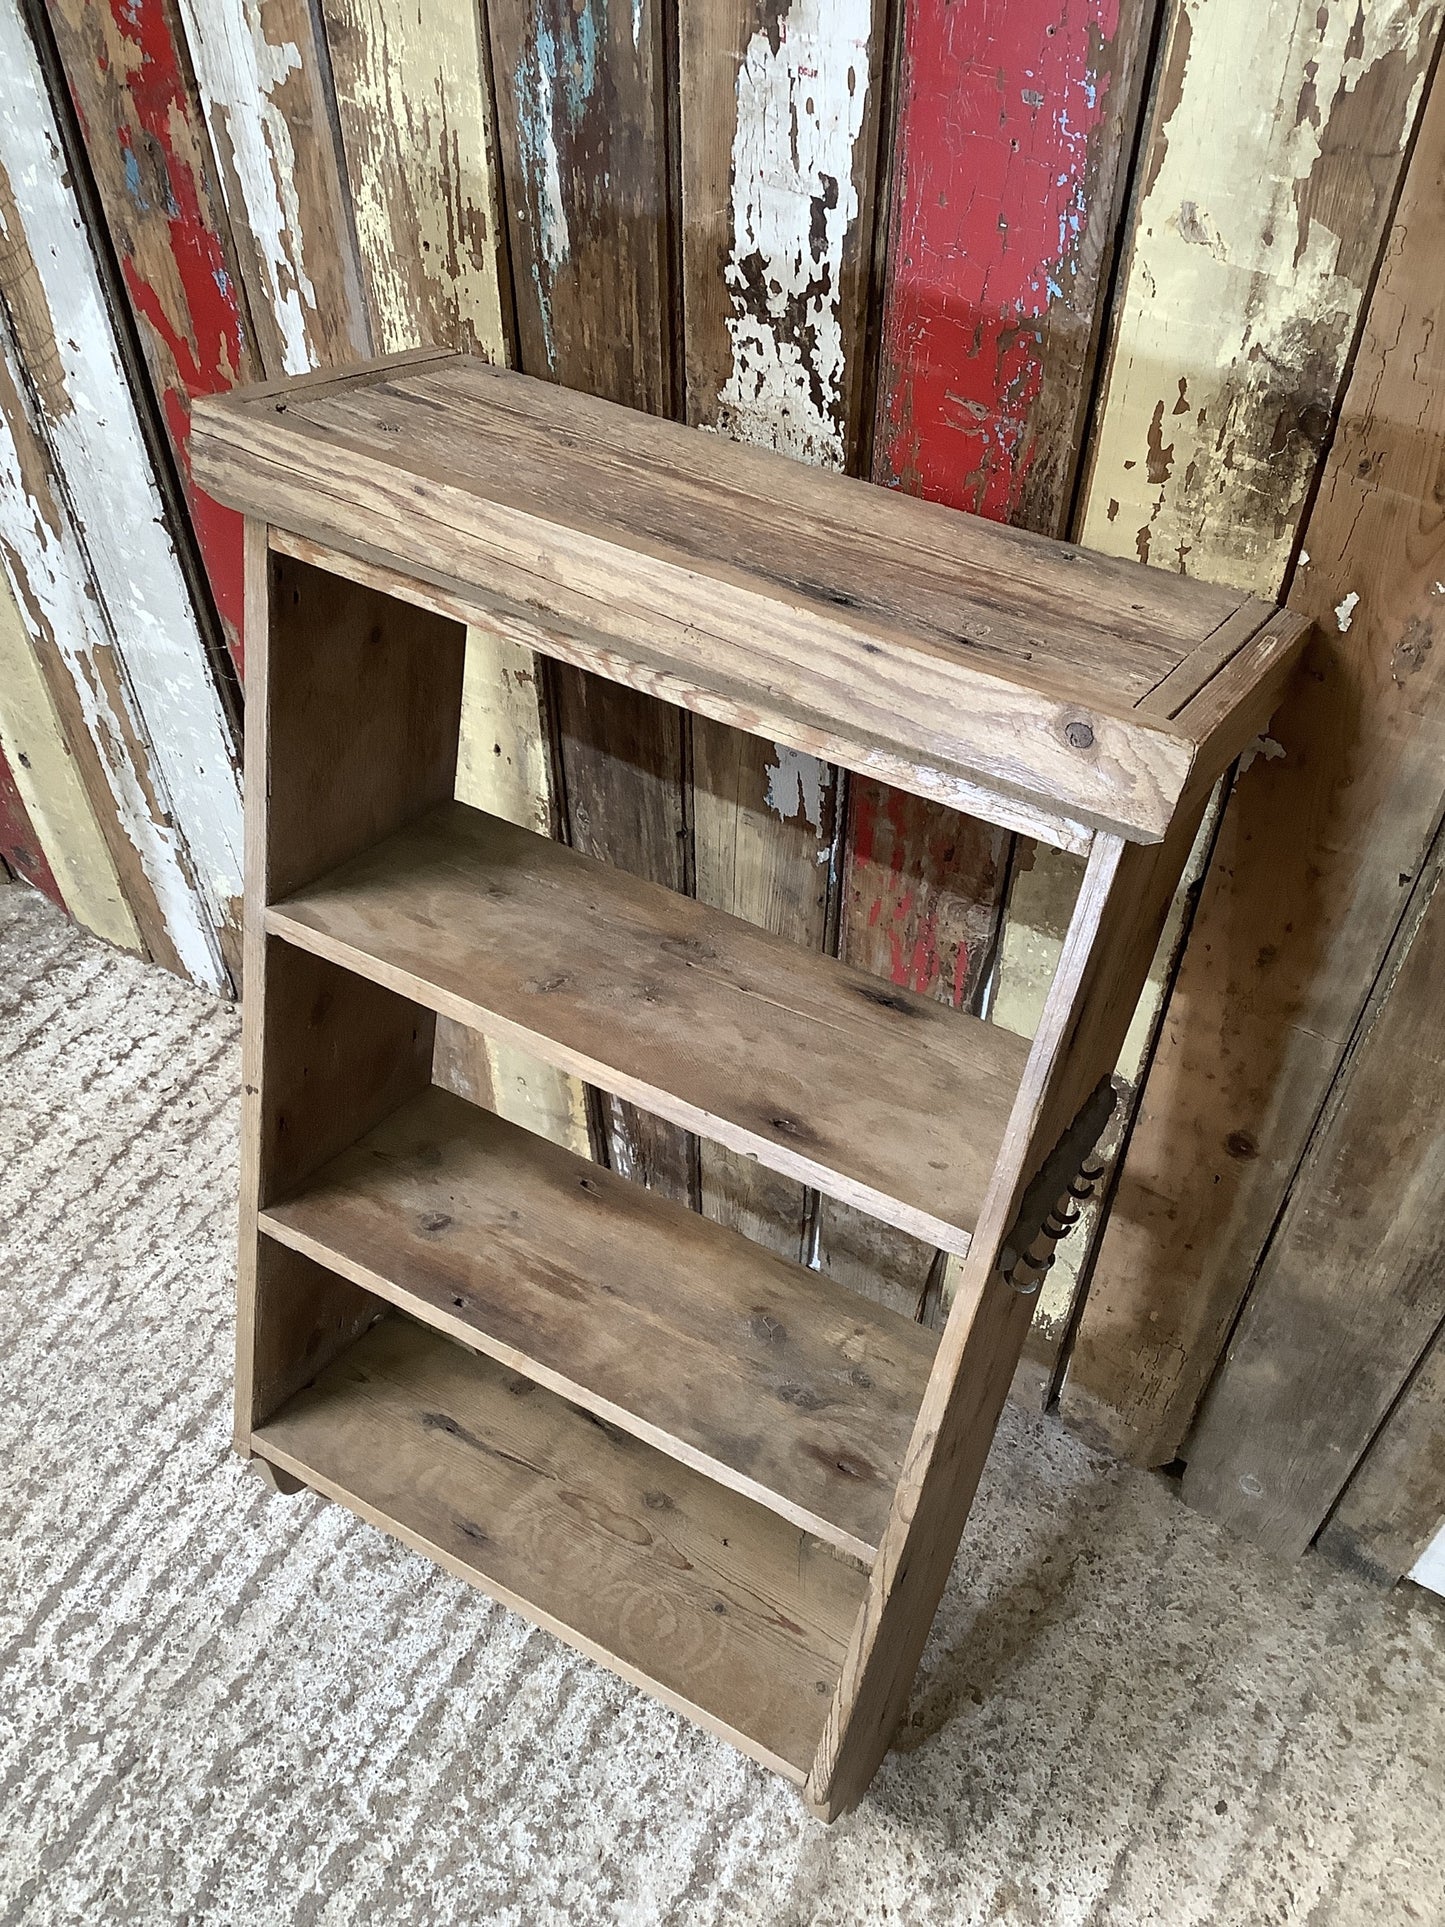 Old Stripped Pine Wall Kitchen Shelves 3 Wooden 2'11"H 1'8" W